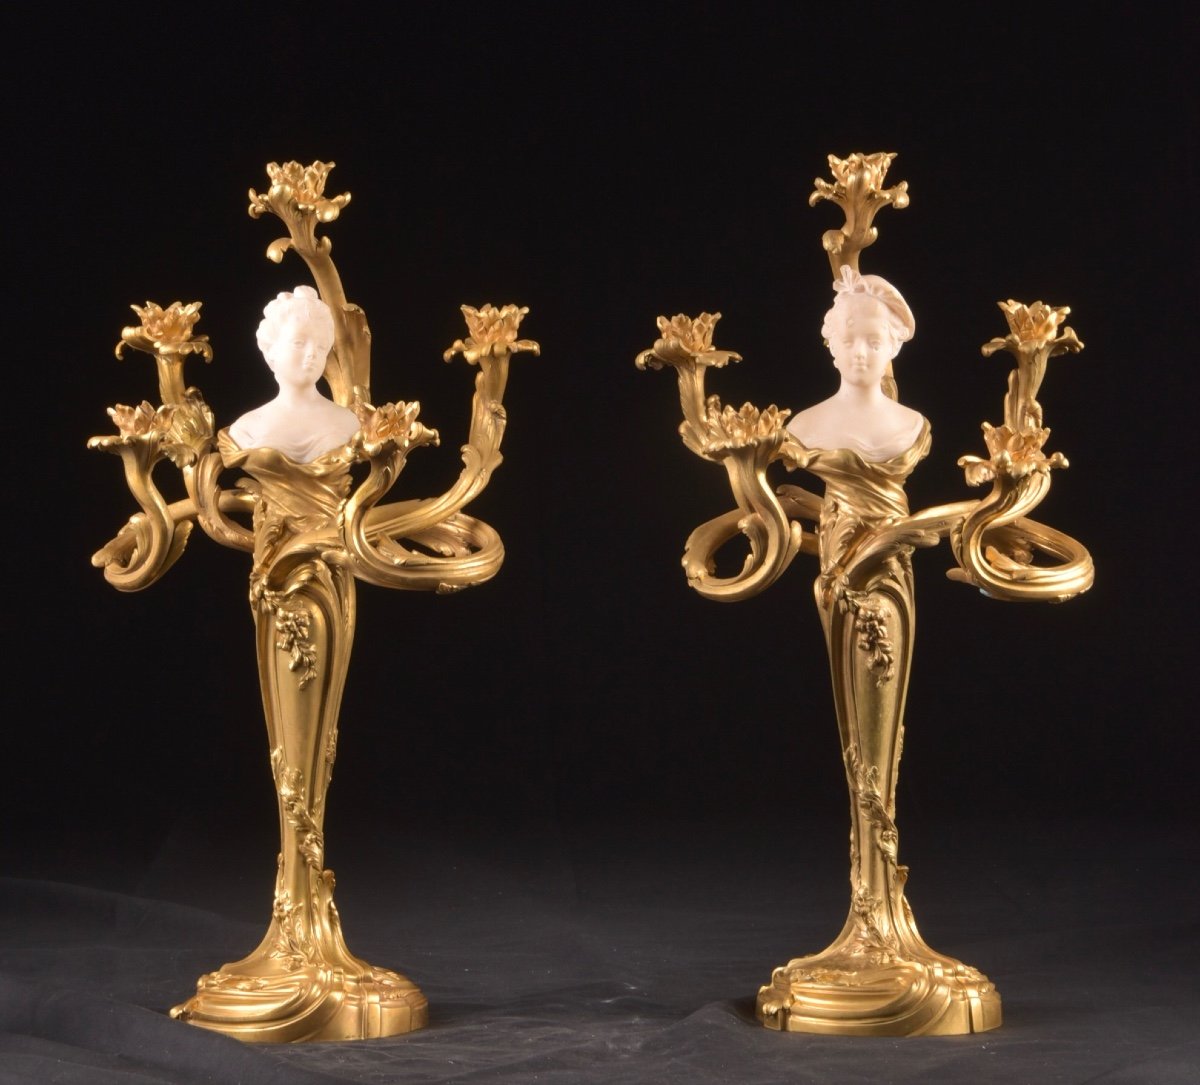 A Large Rare Pair Of 19th Century Louis XVI Style Five-armed Candlesticks